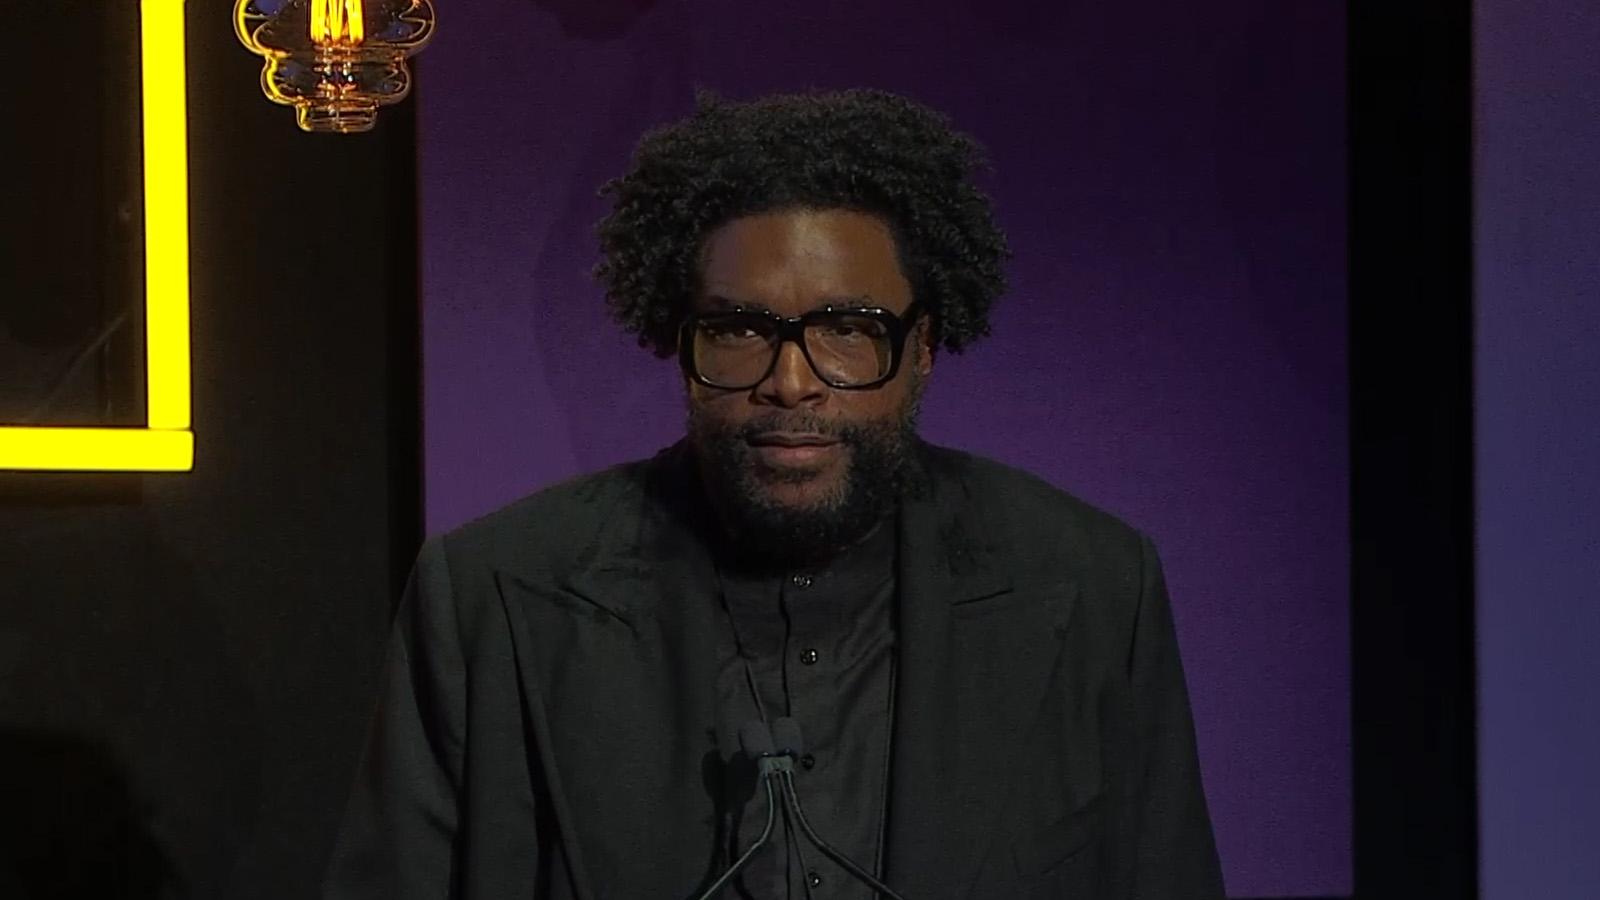 Questlove presents the Best Feature Film award at the 2022 ACE Awards. Courtesy Getty Images